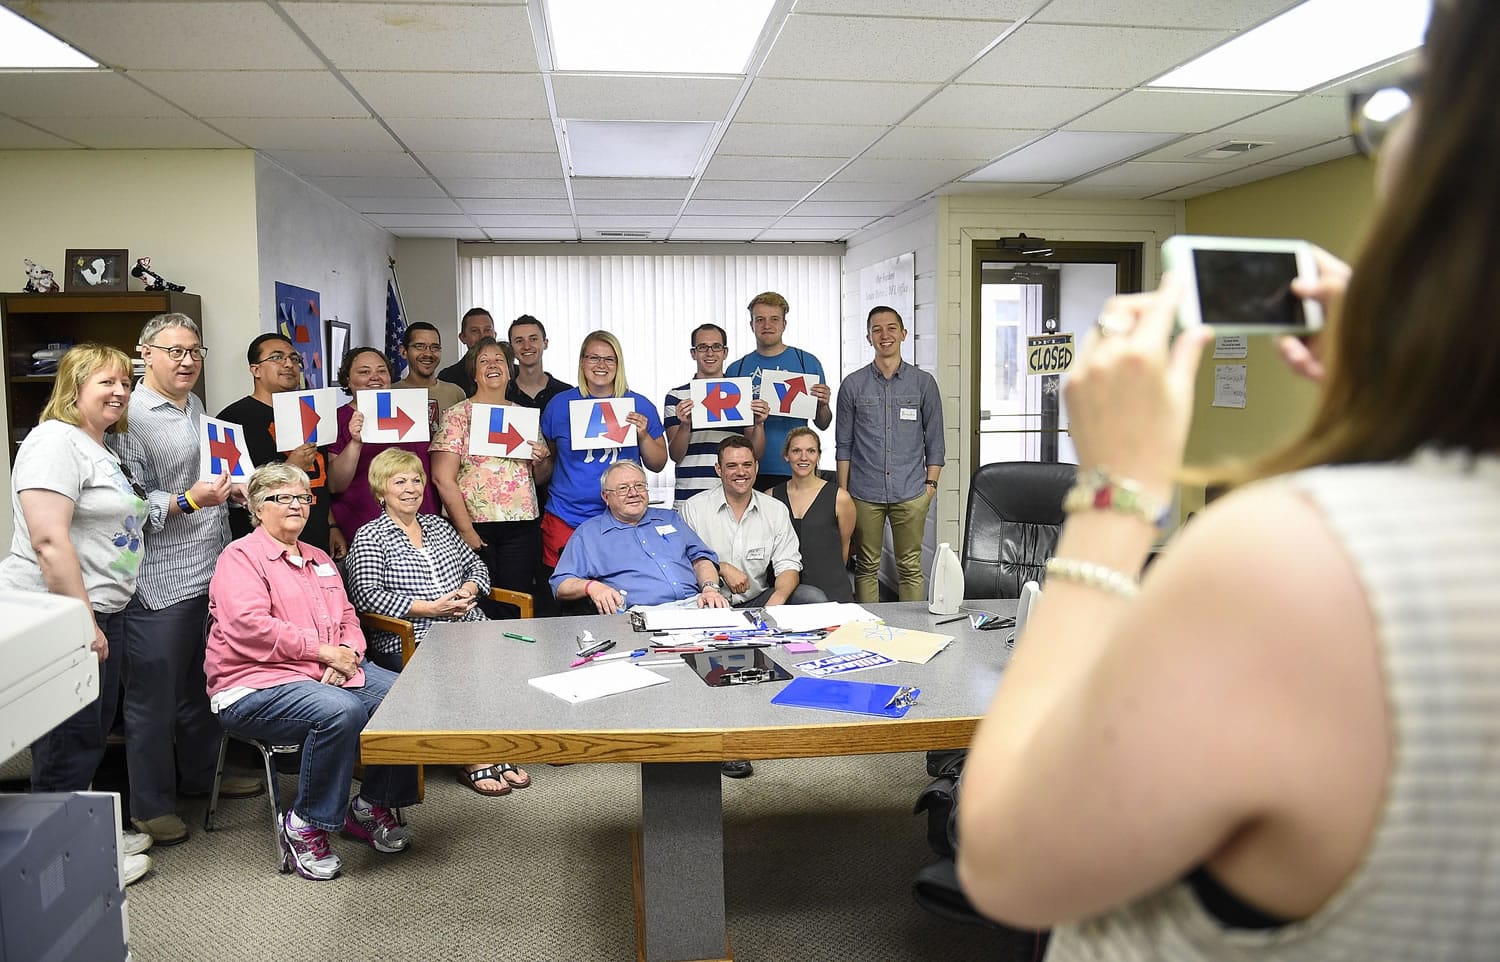 Steph Luger, 25, right, of Minneapolis, photographs the group of future volunteers at the end of the meeting at the Minnesota Democratic/Farmer/Labor Party headquarters in Mankato,  Minn., on Tuesday.